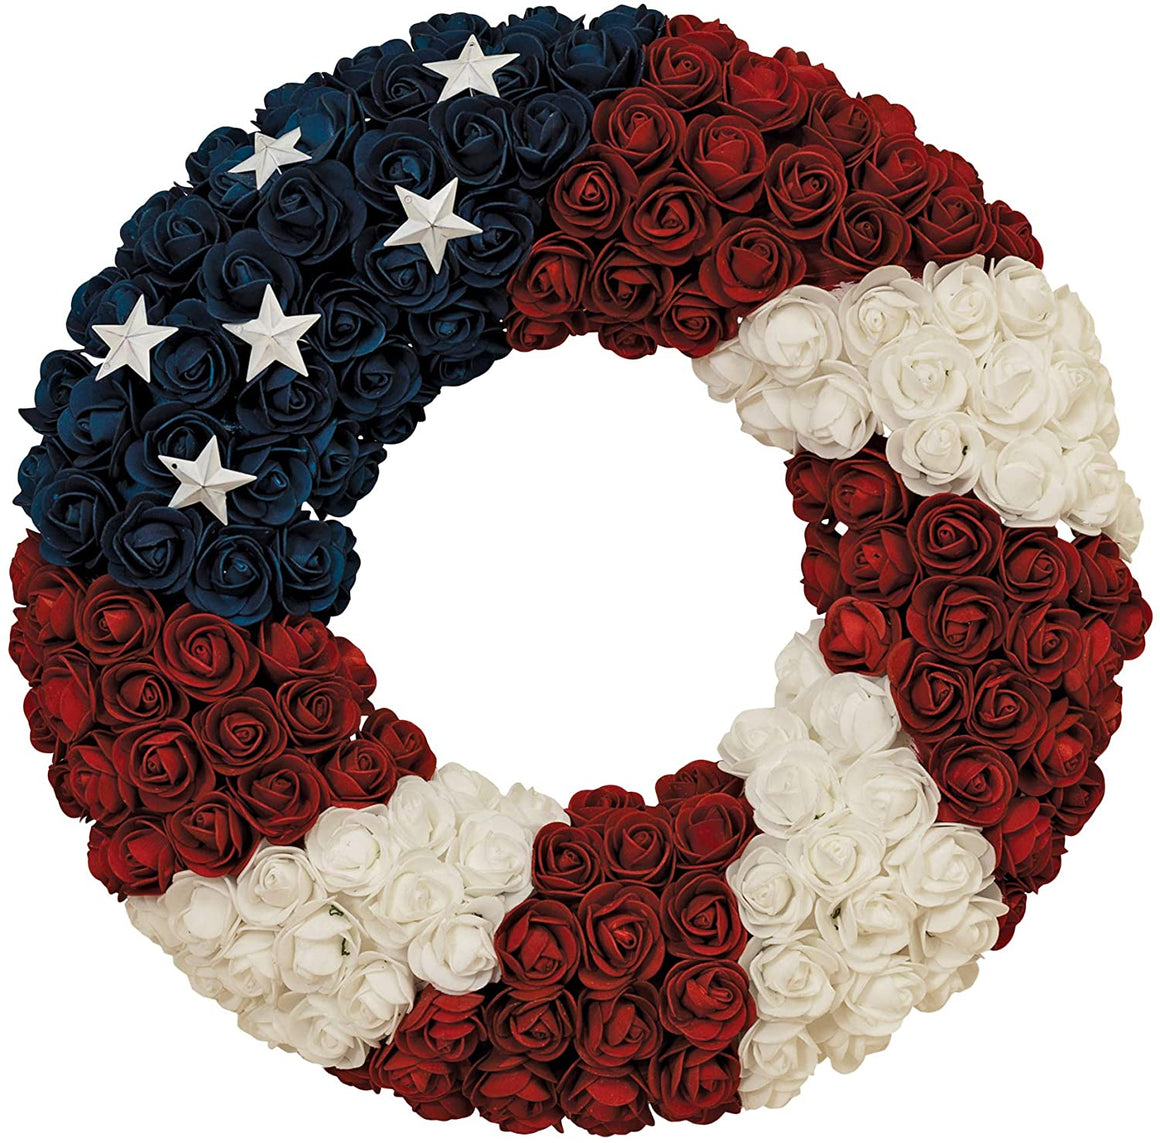 Soft Rose Americana Wreath, Patriotic Wreath 17 Inch Diameter, Roses and Stars, Red White and Blue 4th of July Decorating